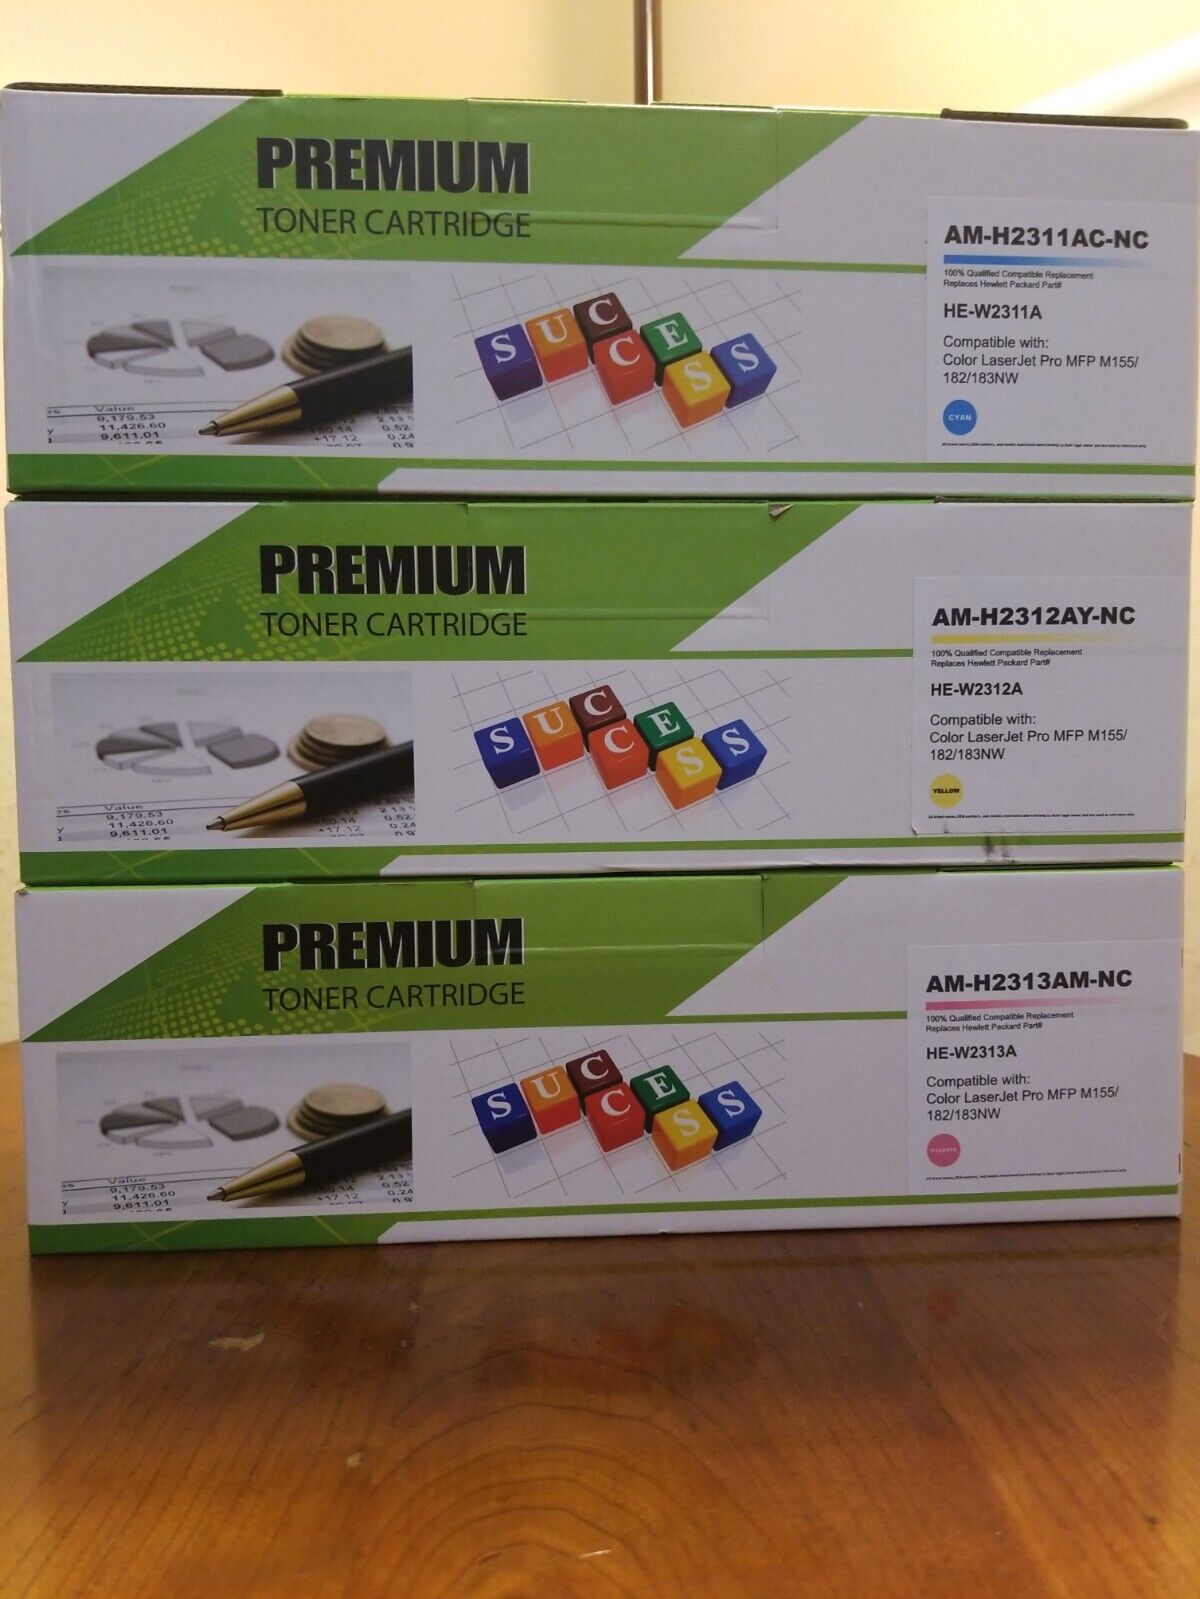 3 Pack Premium Toner Cartridge With NO CHIP Compatible With Color Laser Jet Pro